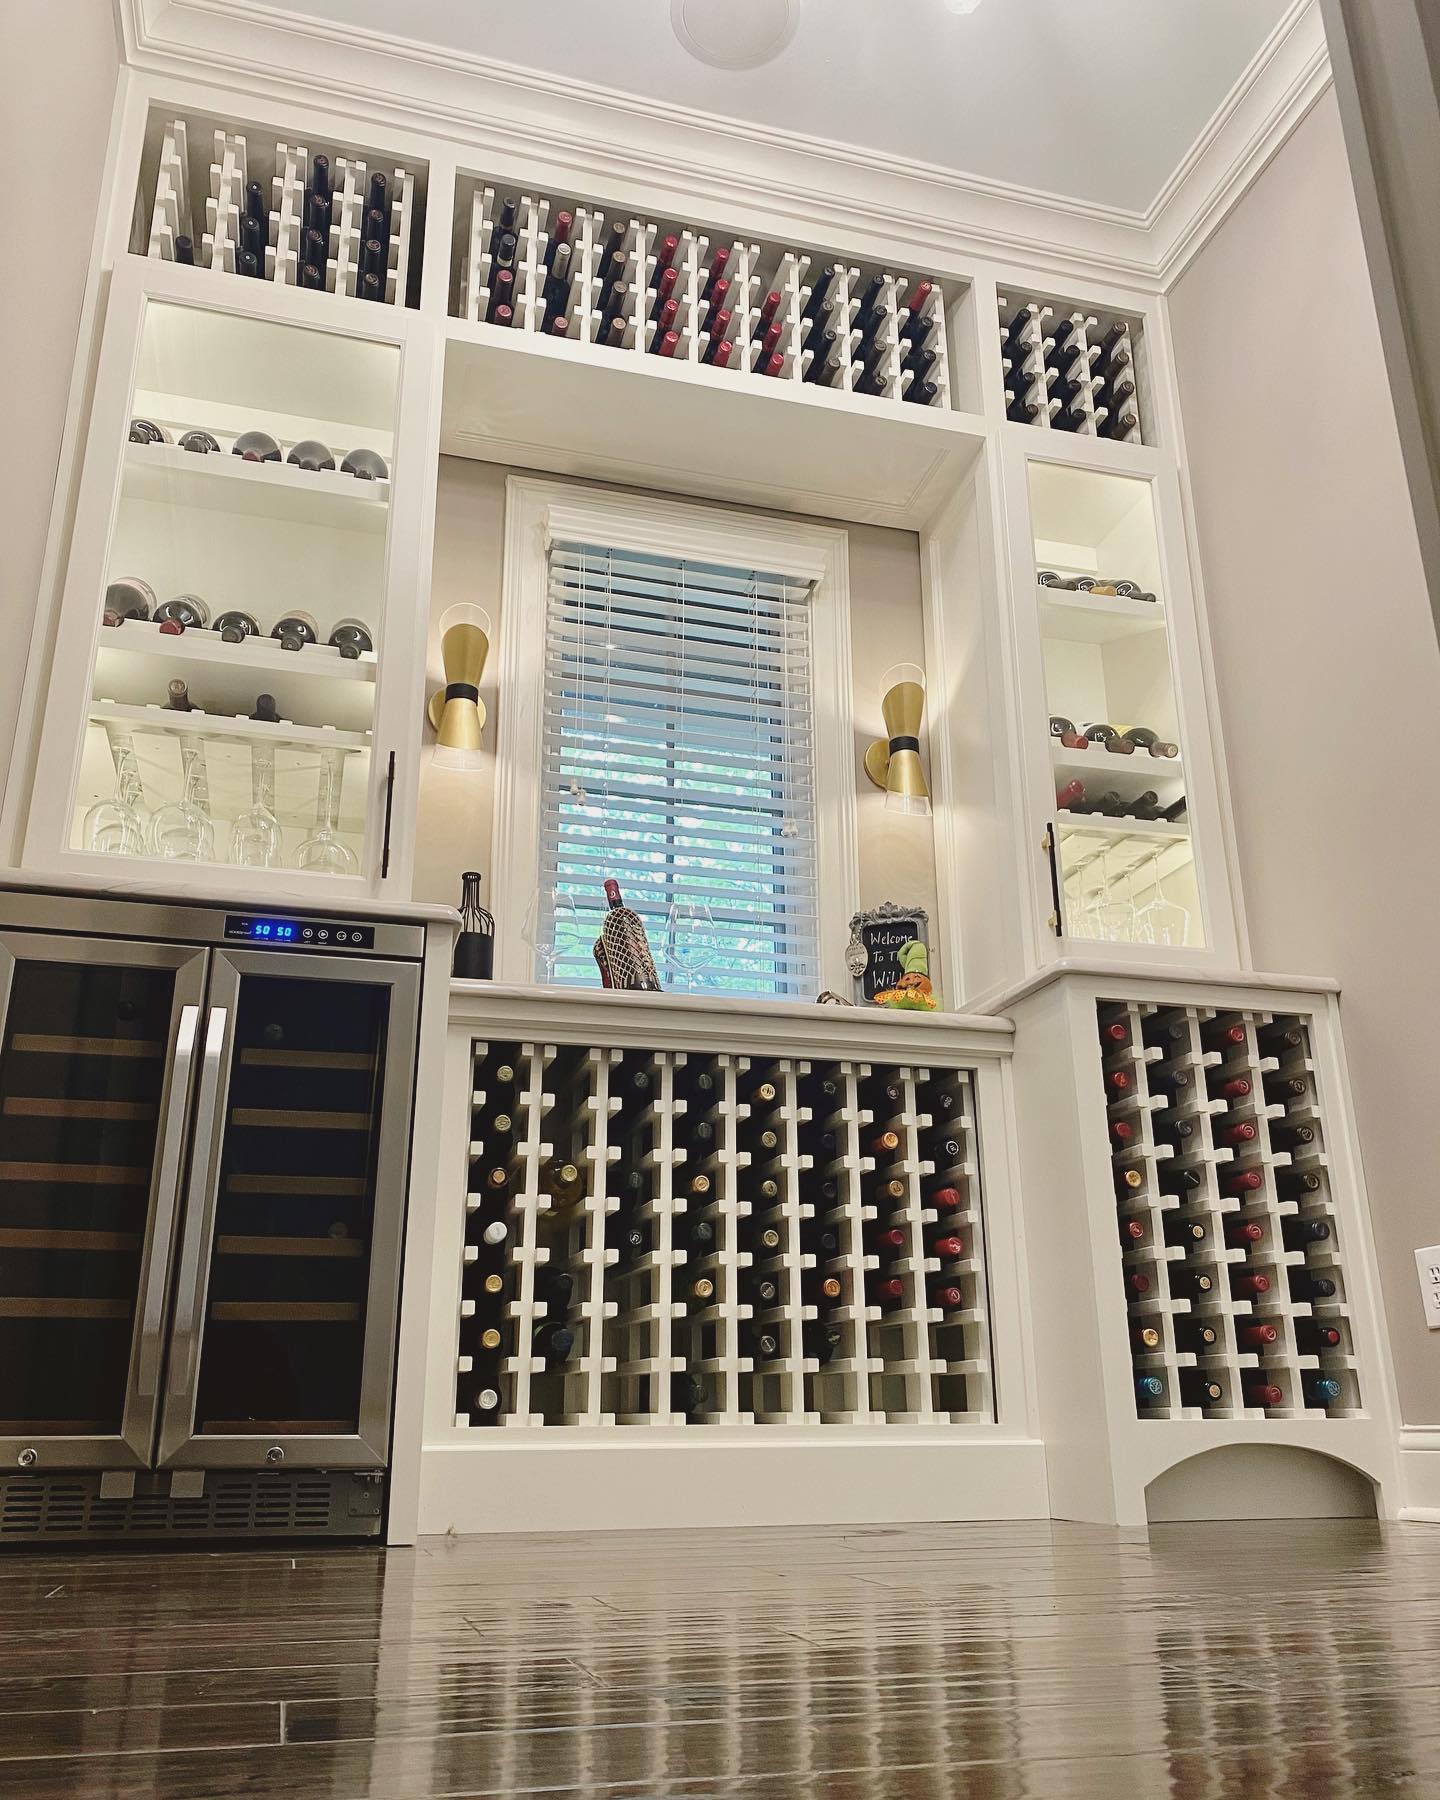 A wine storage room with a window in the center, surrounded by shelves filled with wine bottles, two wall sconces, glass storage, and a wine fridge on the left.